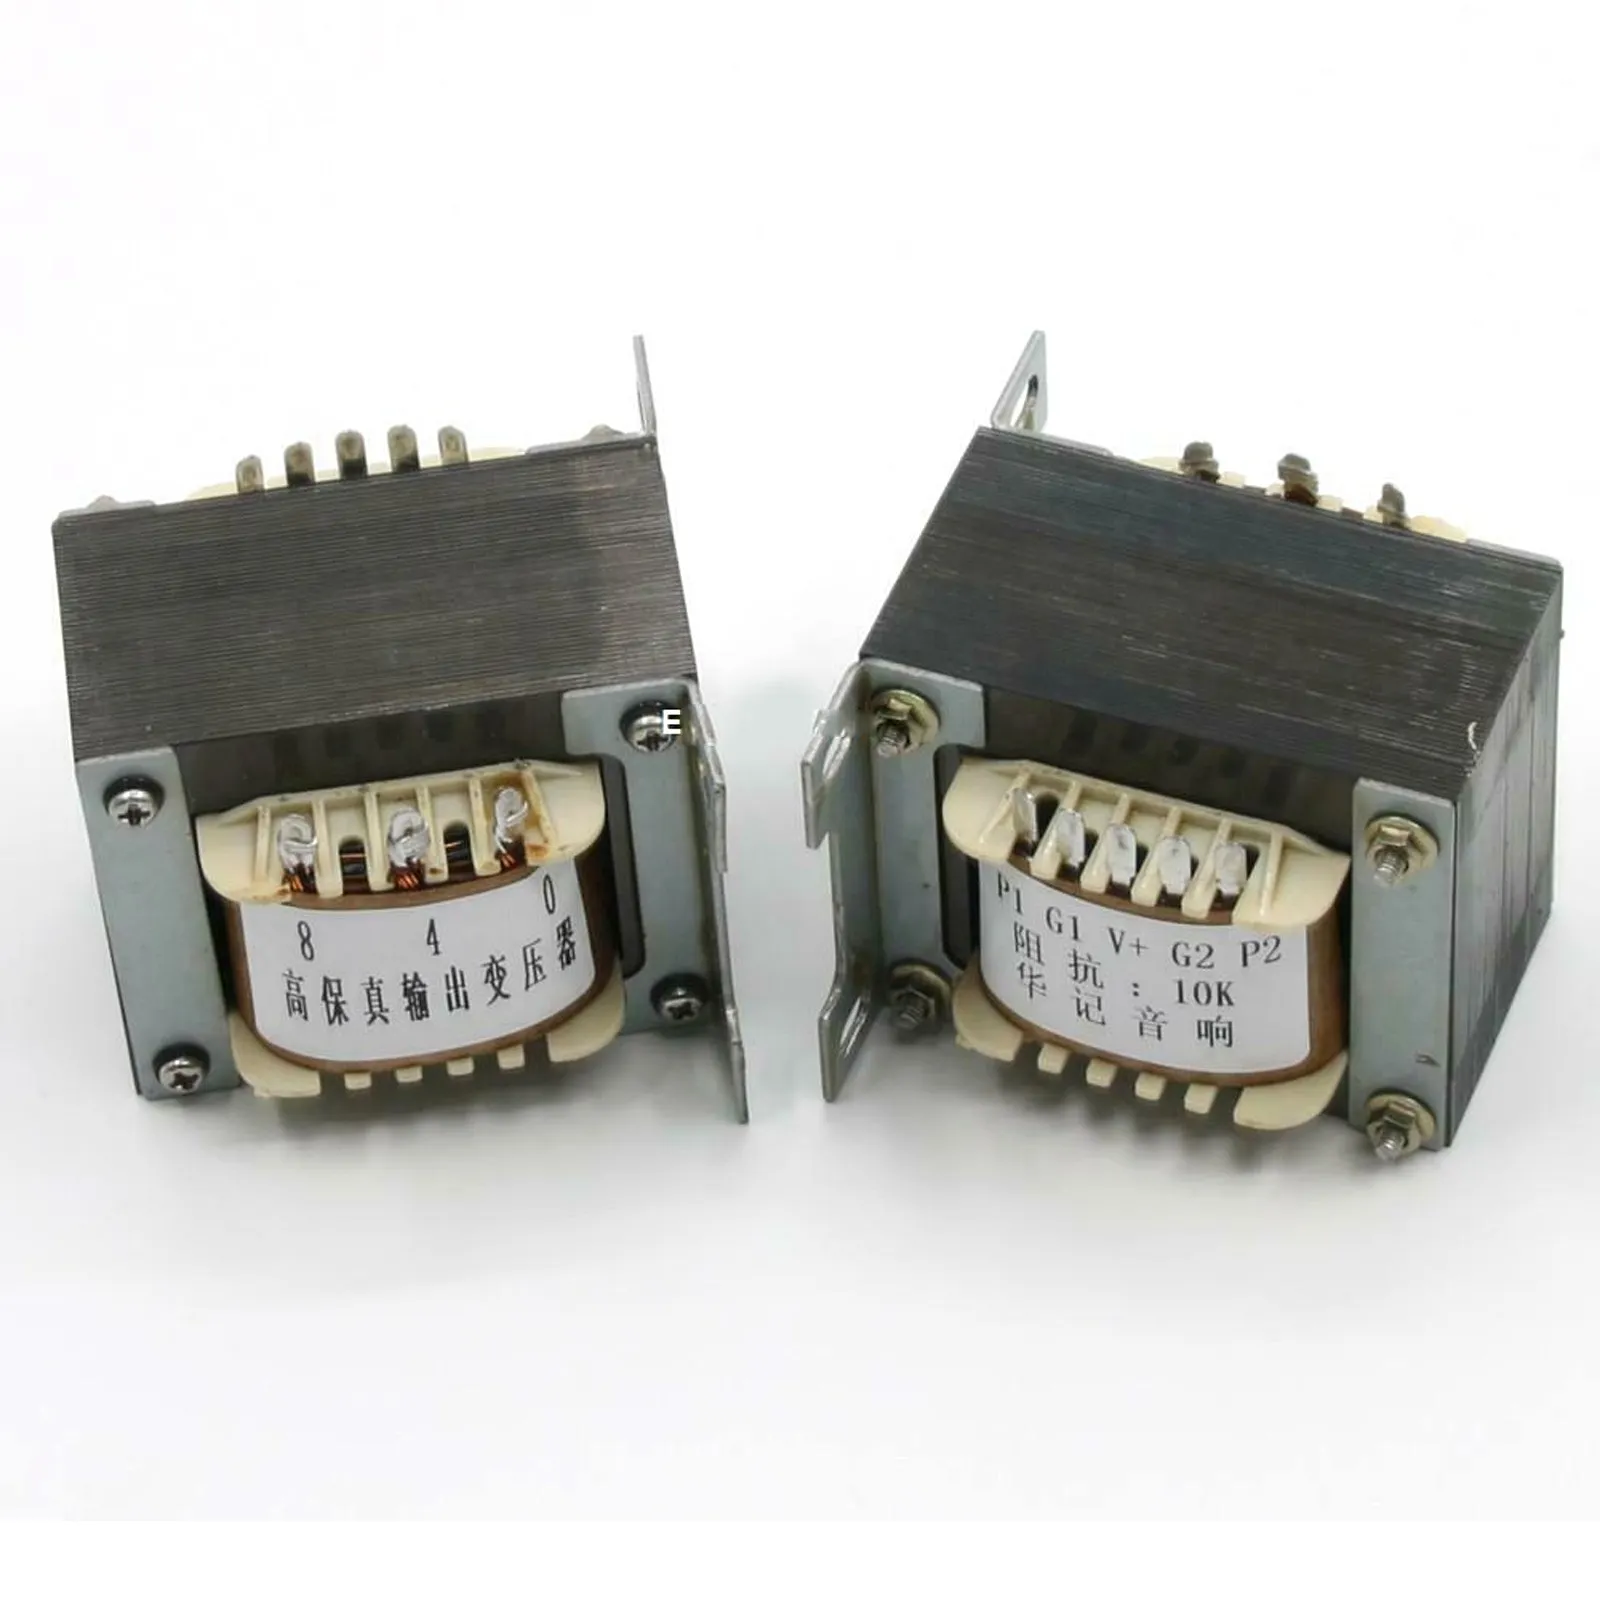 1 Pairs 15W Push-Pull Tube Output Transformer 0-4-8 Ohm For 6P1 /6P14/EL84/6P6P/FU-32 Tube Amplifier